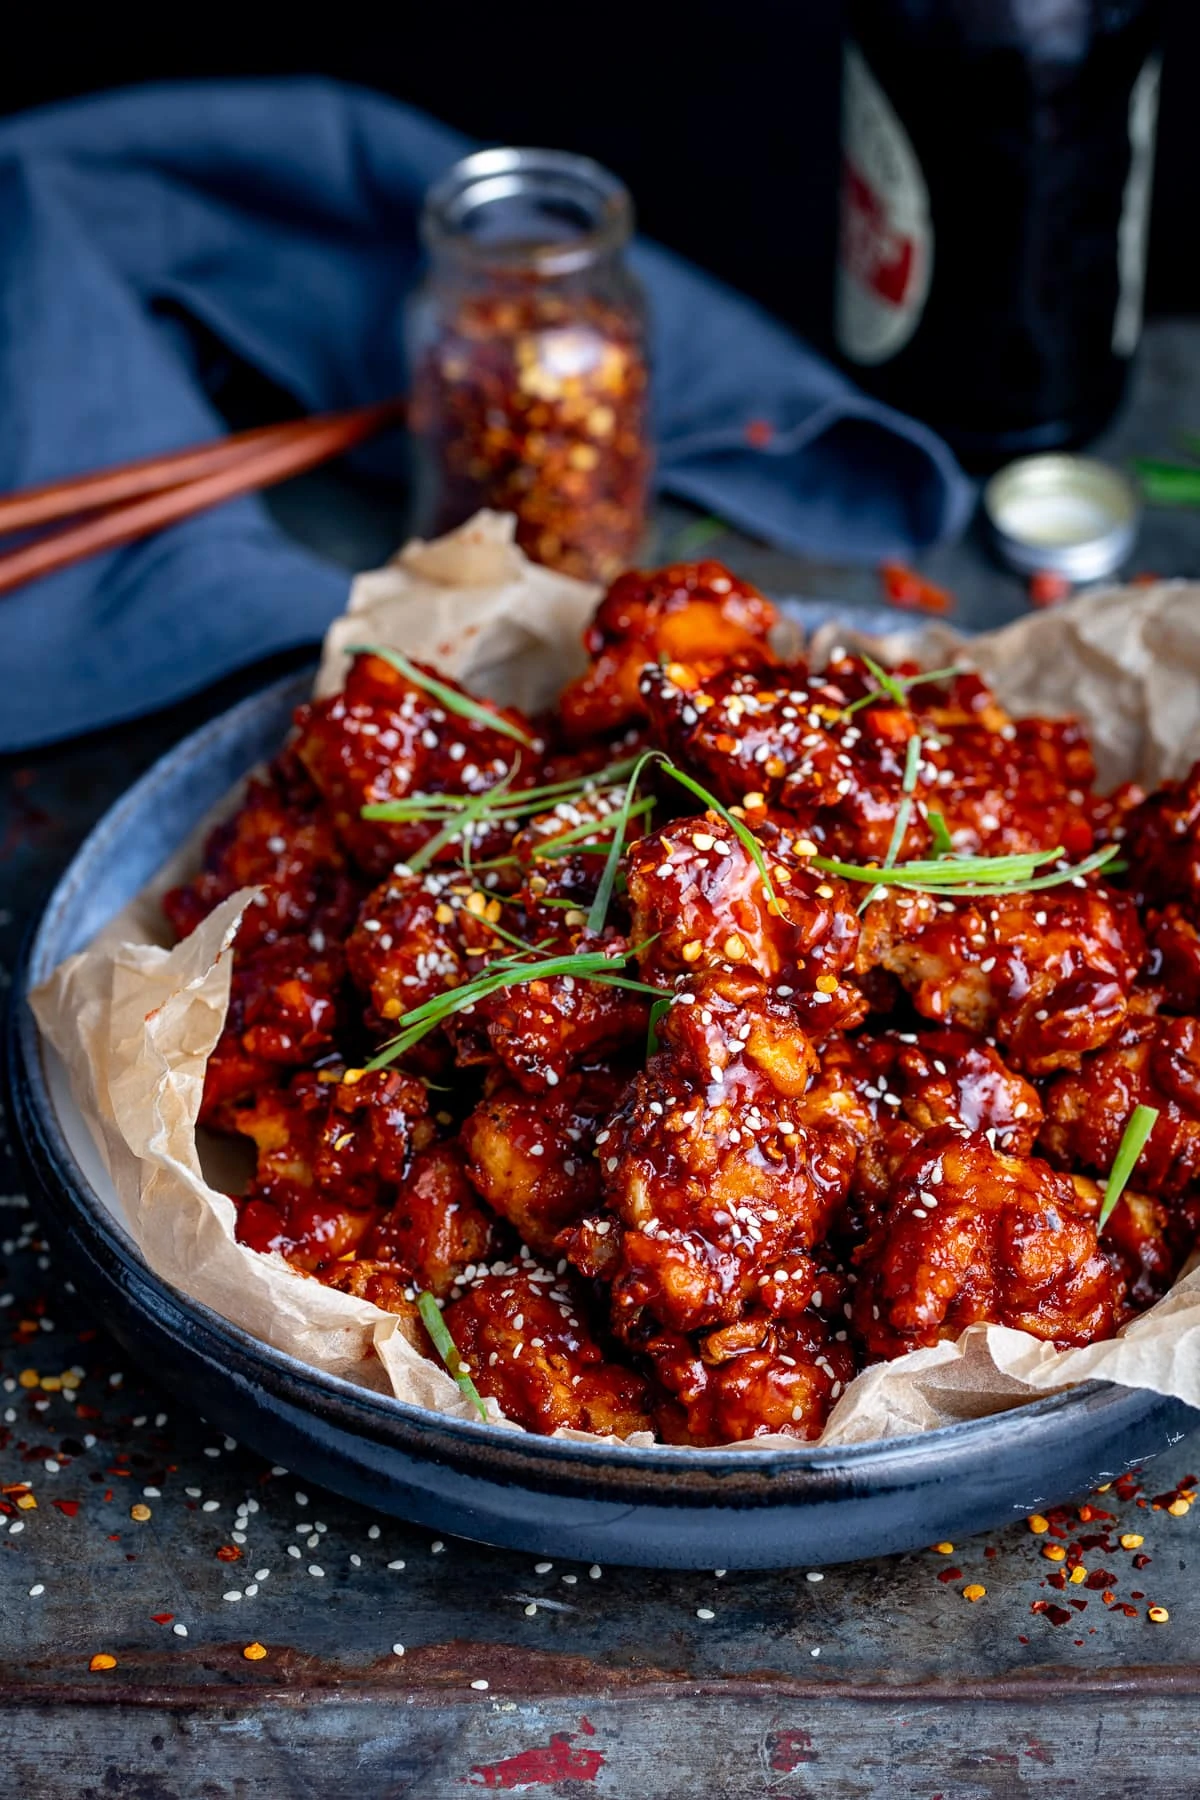 Korean fried chicken in a blue bowl lined with paper. Napkin, chopsticks and jar of chilli flakes in the background.